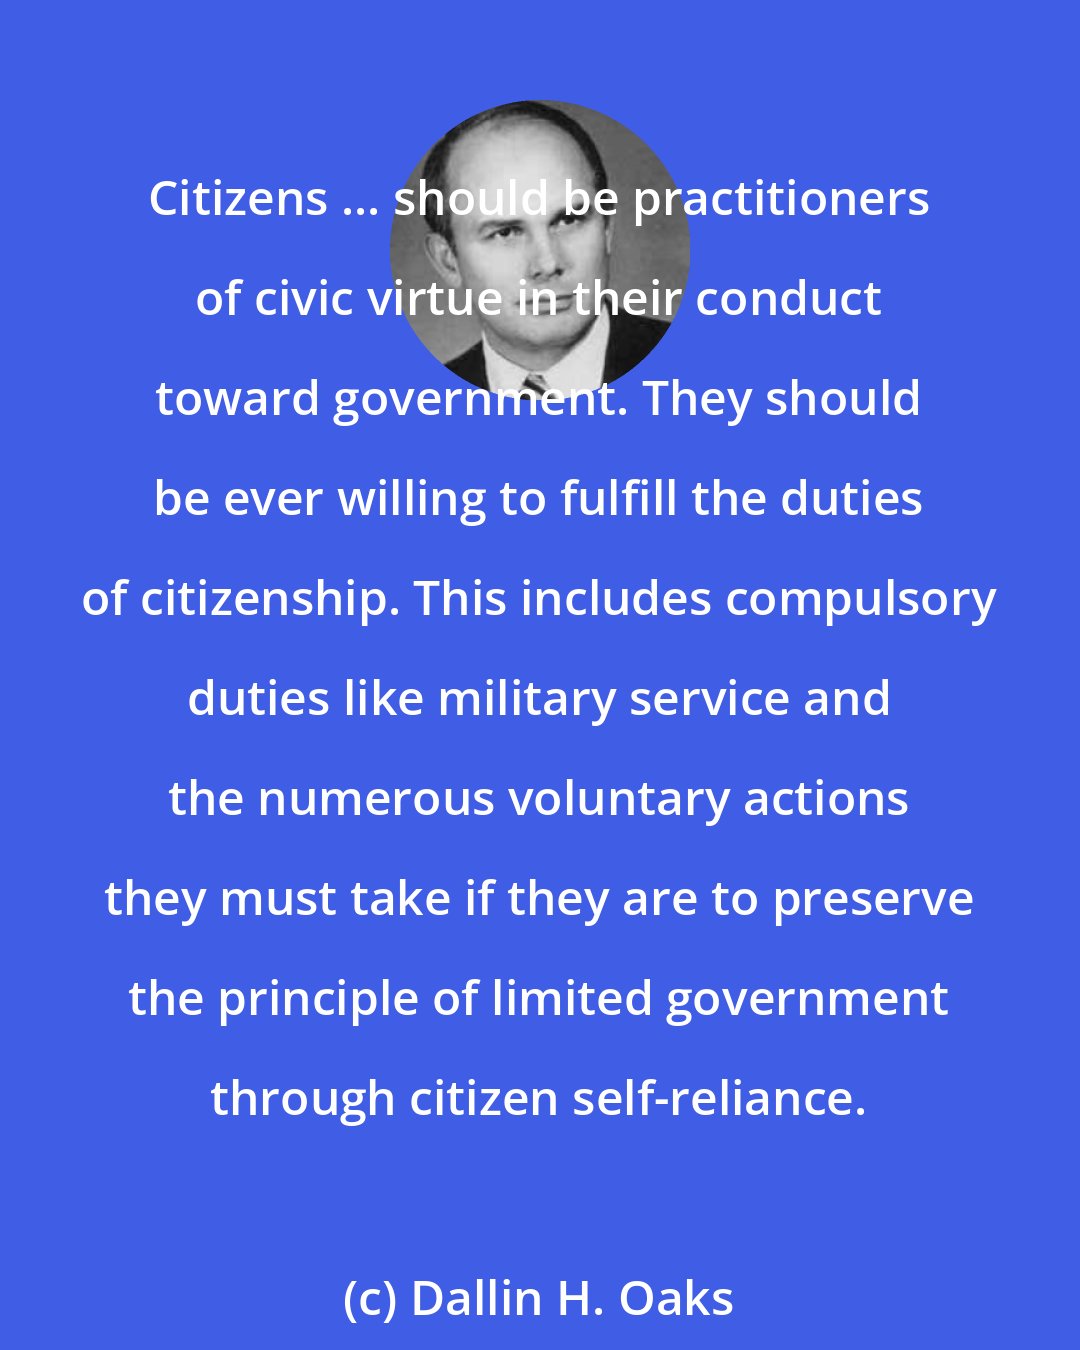 Dallin H. Oaks: Citizens ... should be practitioners of civic virtue in their conduct toward government. They should be ever willing to fulfill the duties of citizenship. This includes compulsory duties like military service and the numerous voluntary actions they must take if they are to preserve the principle of limited government through citizen self-reliance.